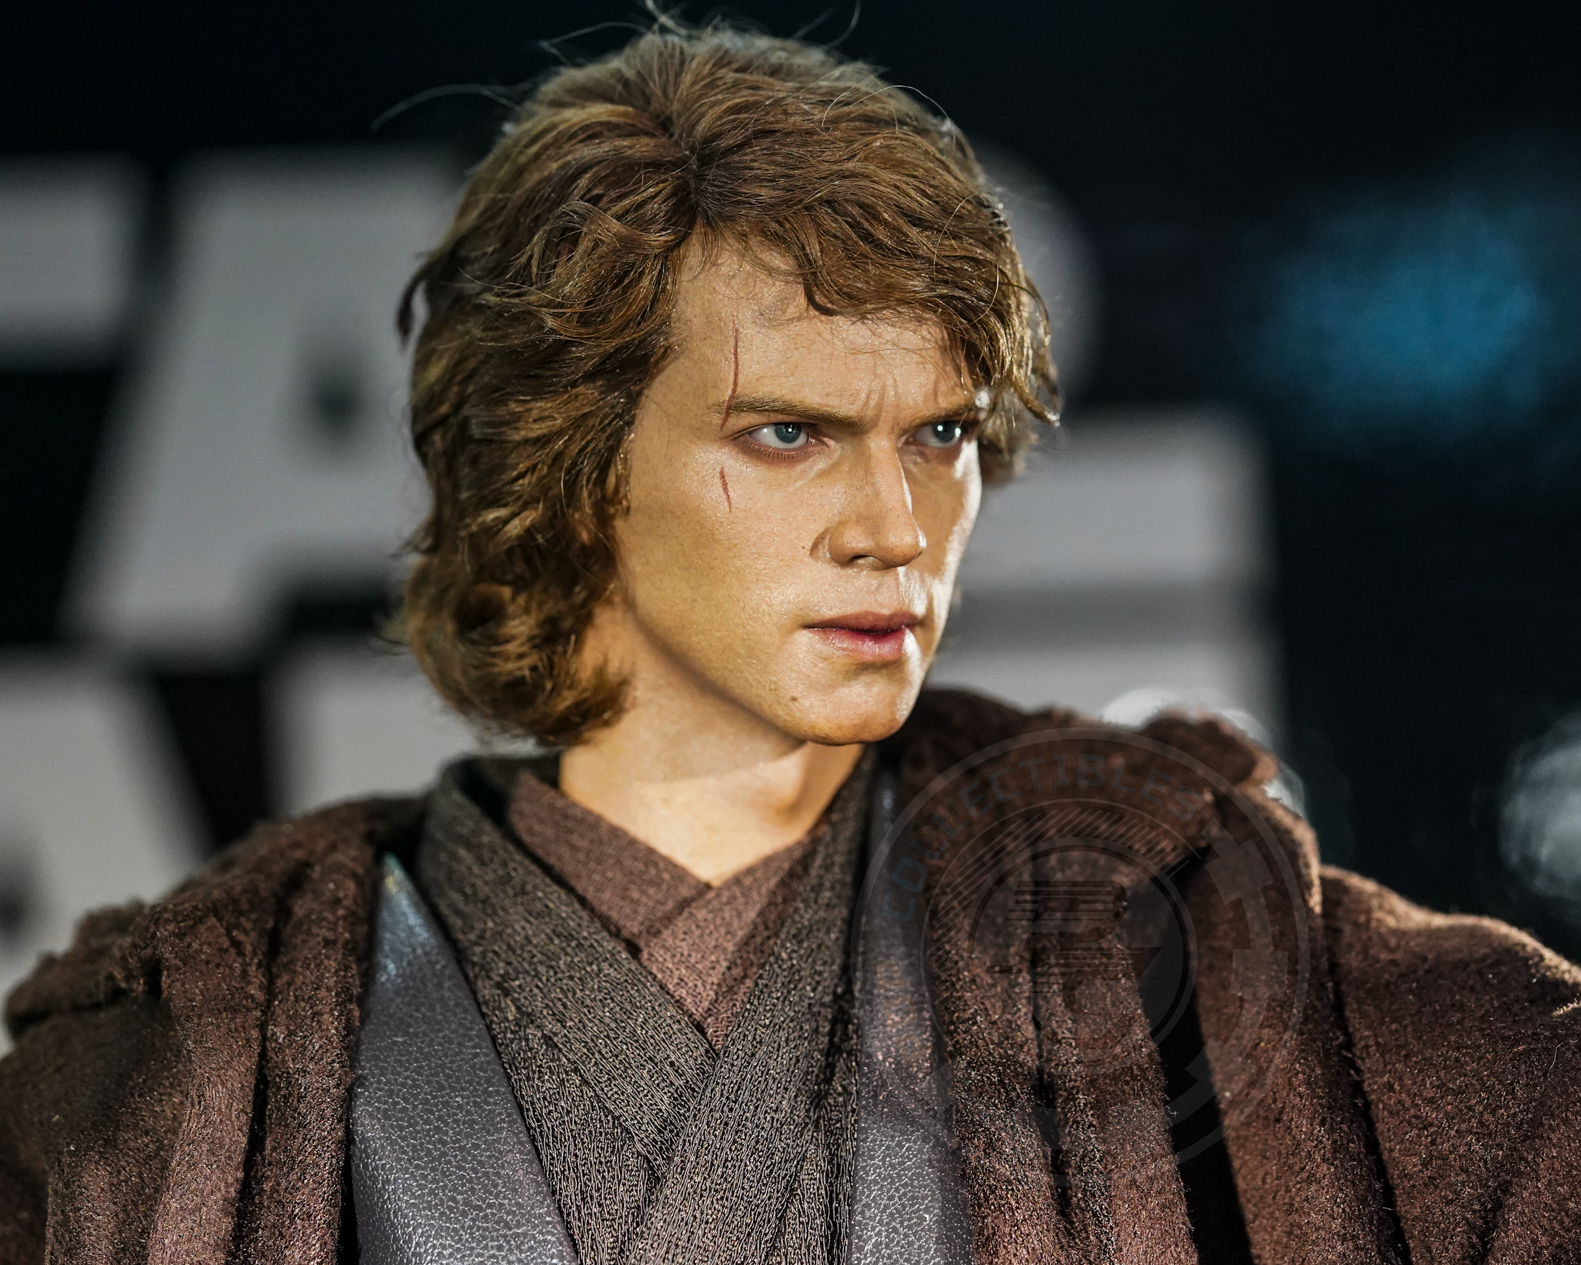 StarWars - NEW PRODUCT: HOT TOYS: STAR WARS EPISODE III: REVENGE OF THE SITH™ ANAKIN SKYWALKER™ 1/6TH SCALE COLLECTIBLE FIGURE - Page 7 DSC03930-2_1024x1024@2x